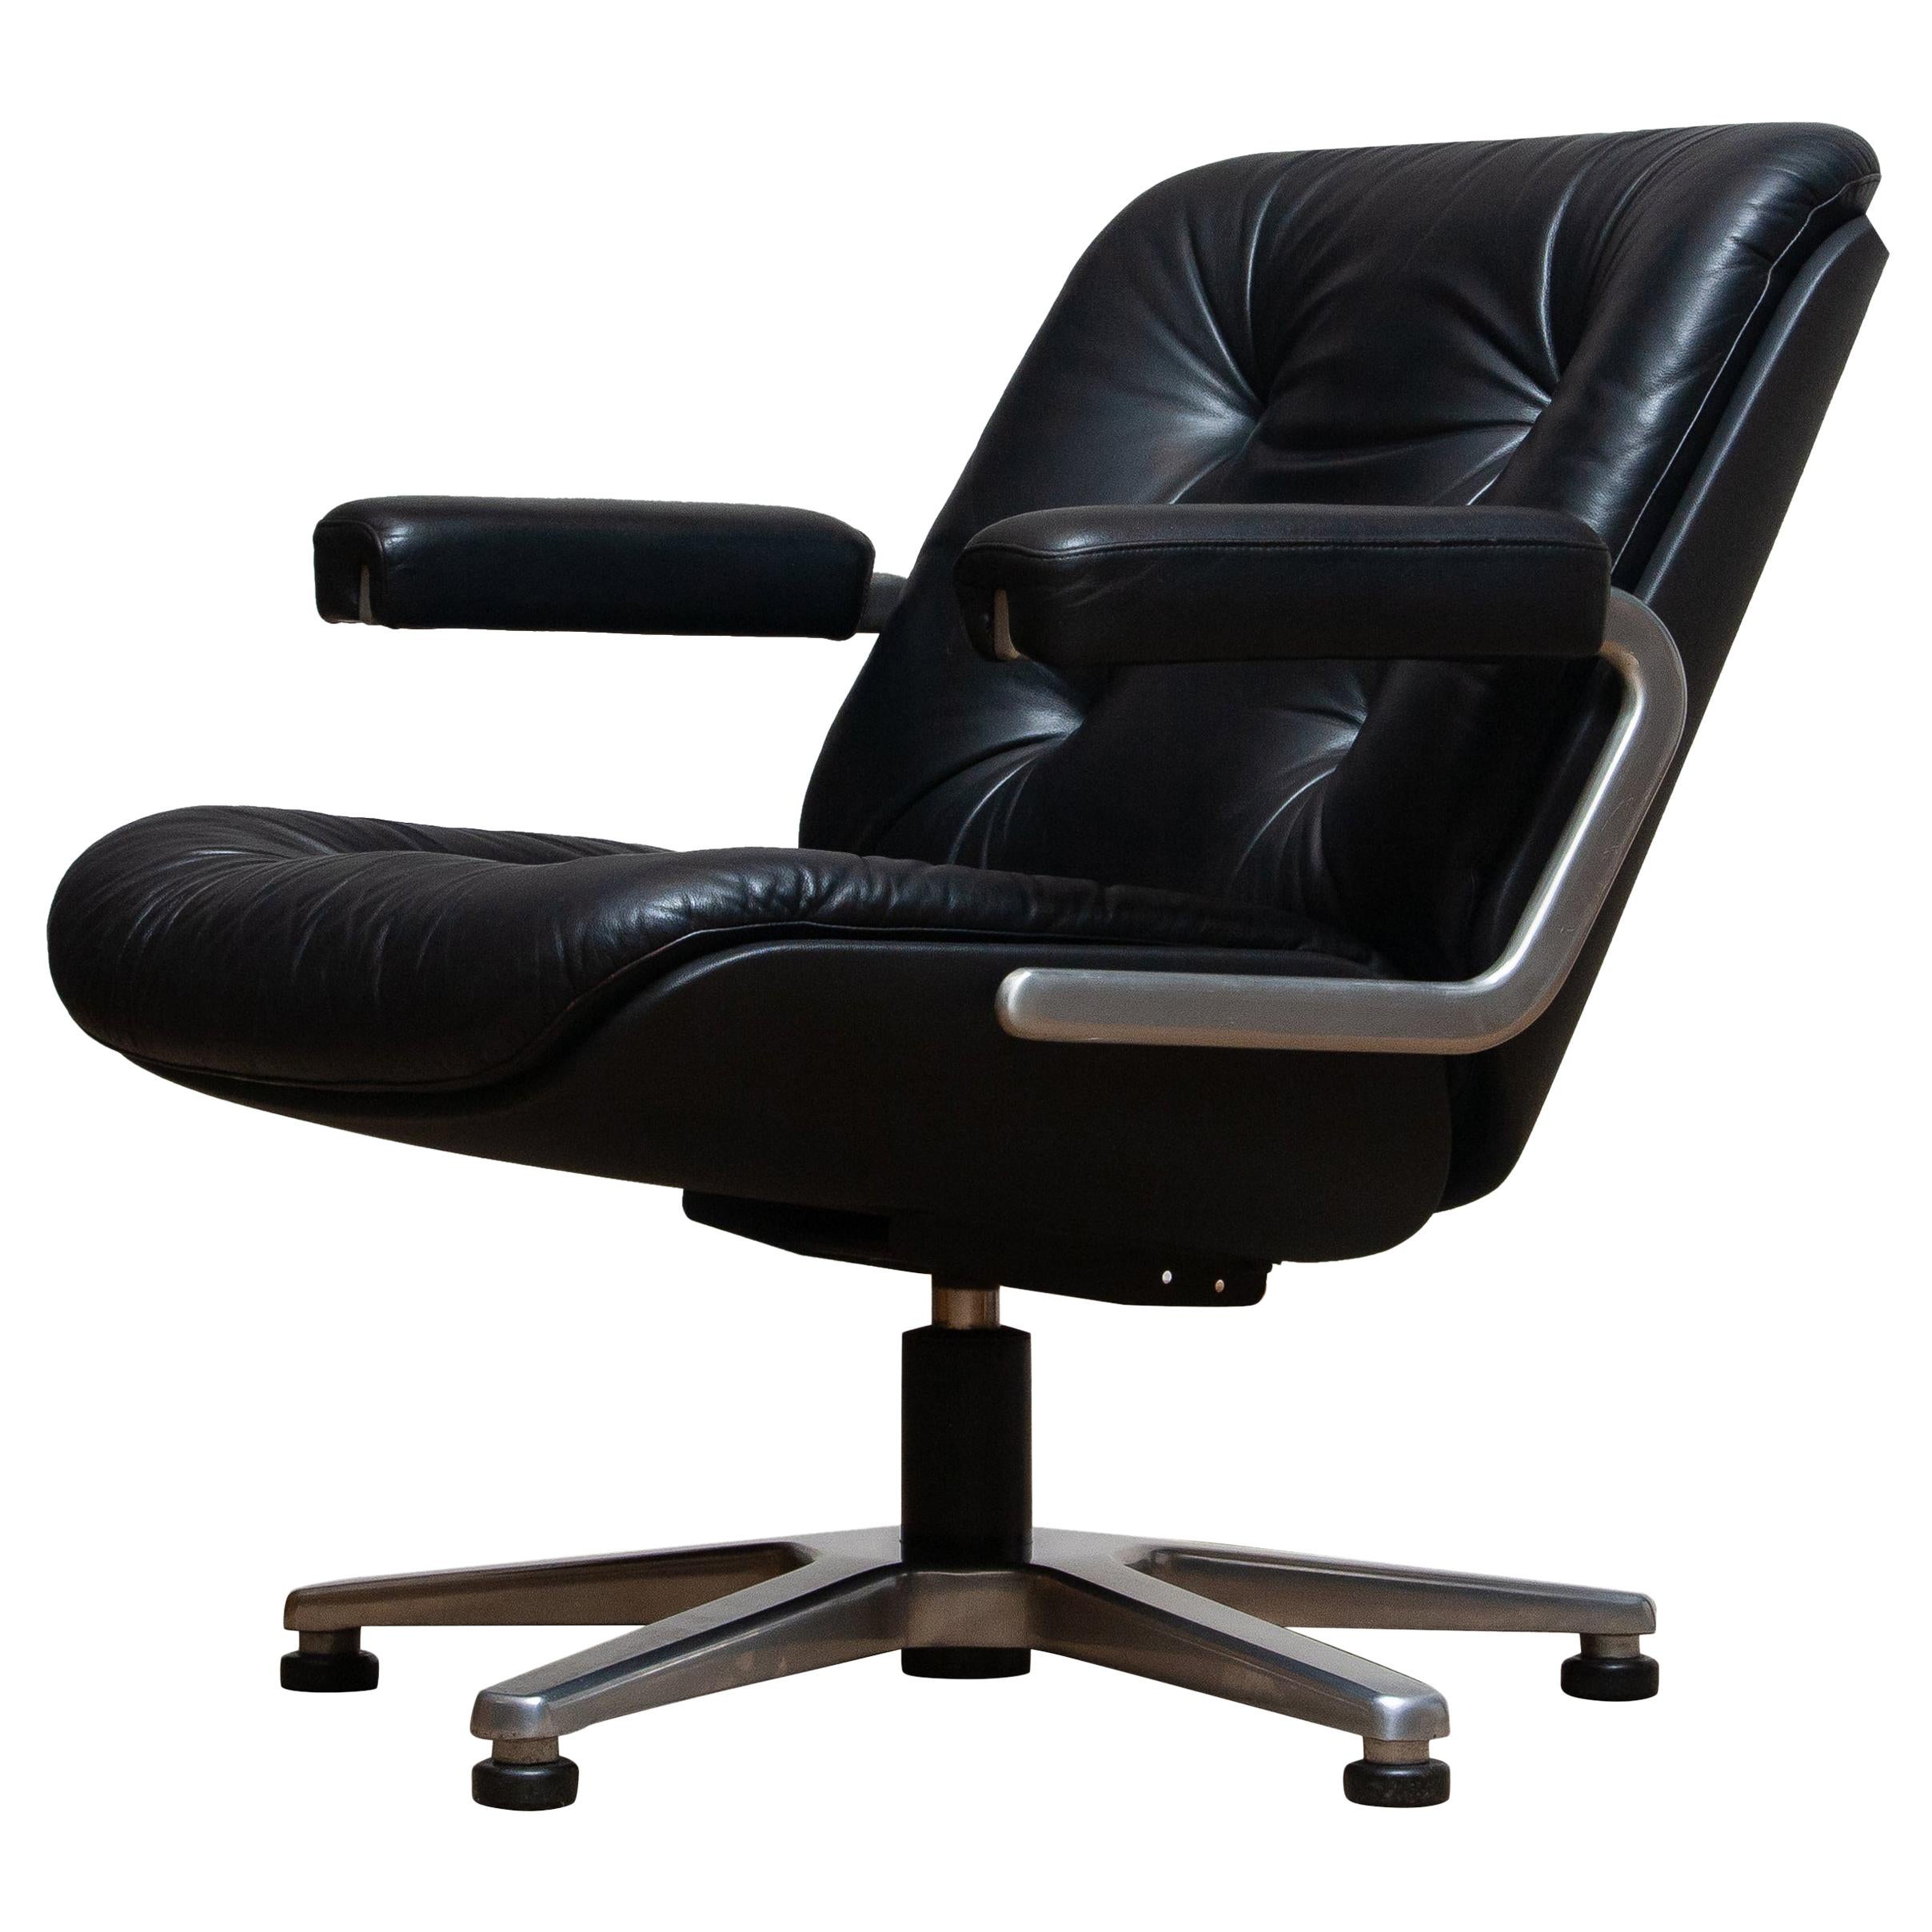 Mid-Century Modern 1960s, Black Leather Swivel Chair by Martin Stoll for Giroflex Stoll Mdl, 7065